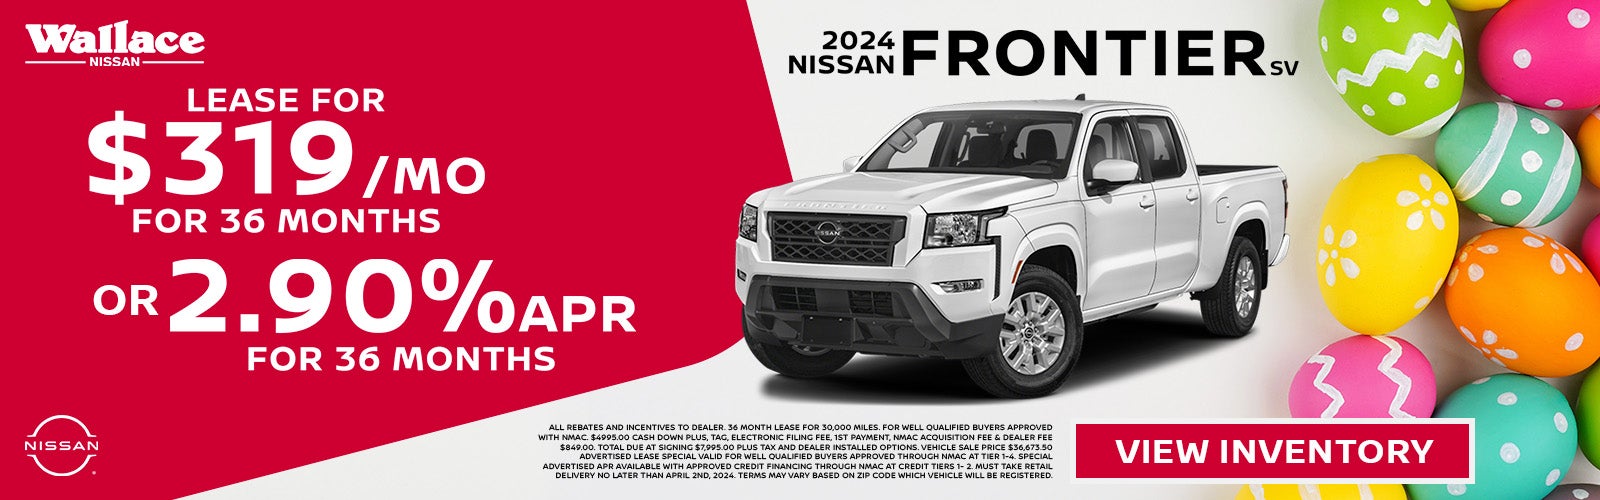 Nissan Frontier Special Offer